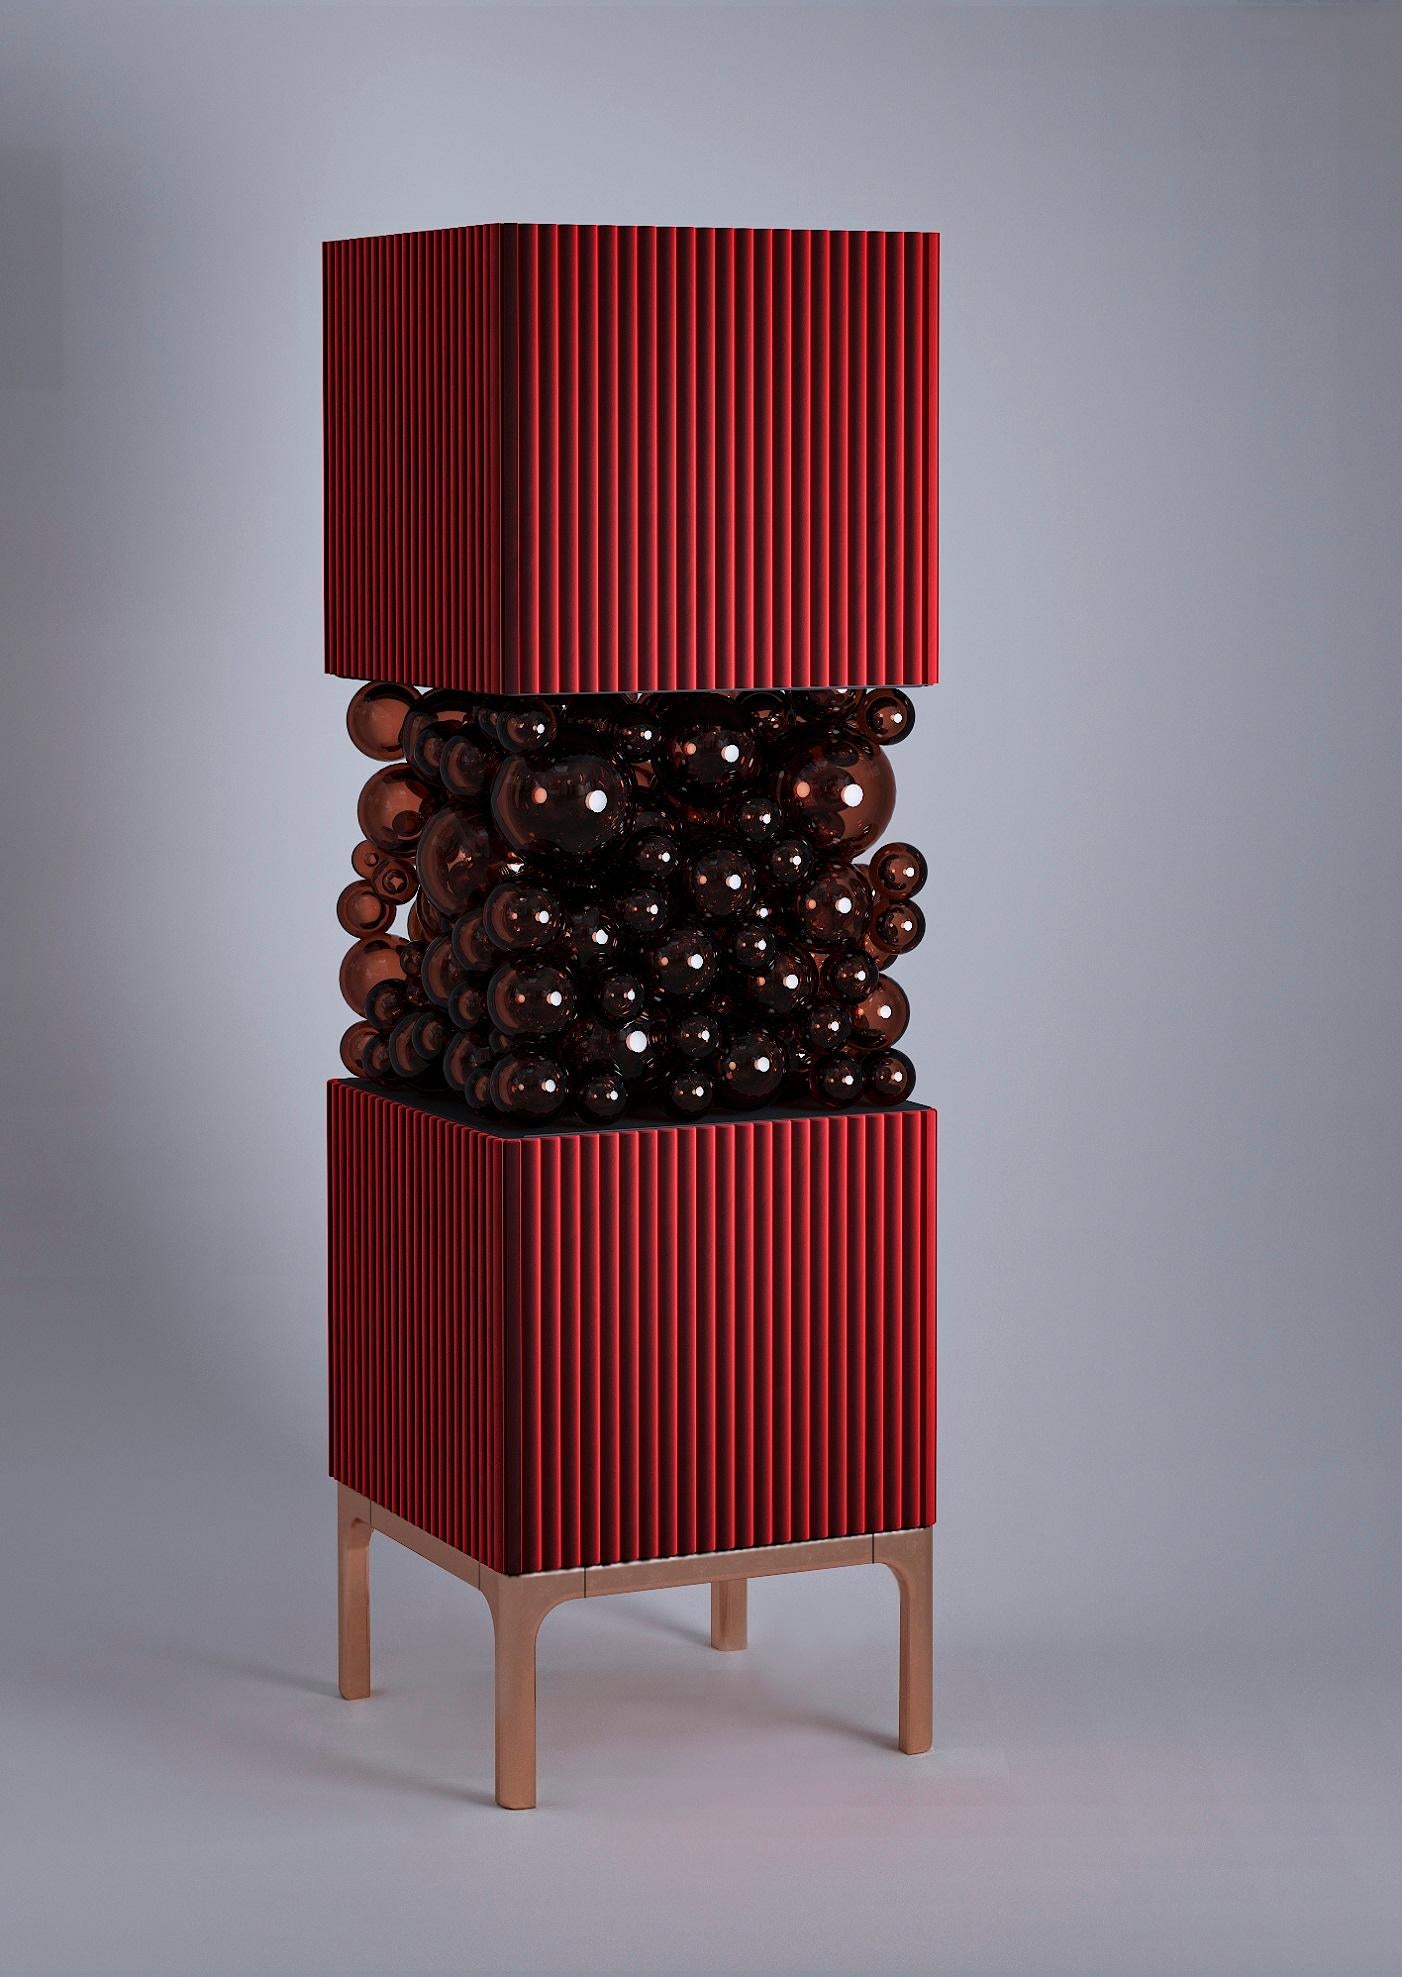 Ukrainian Dark-Red Cabinet, Bubbles Collection, Amazing Emotional Design for Your Interior For Sale